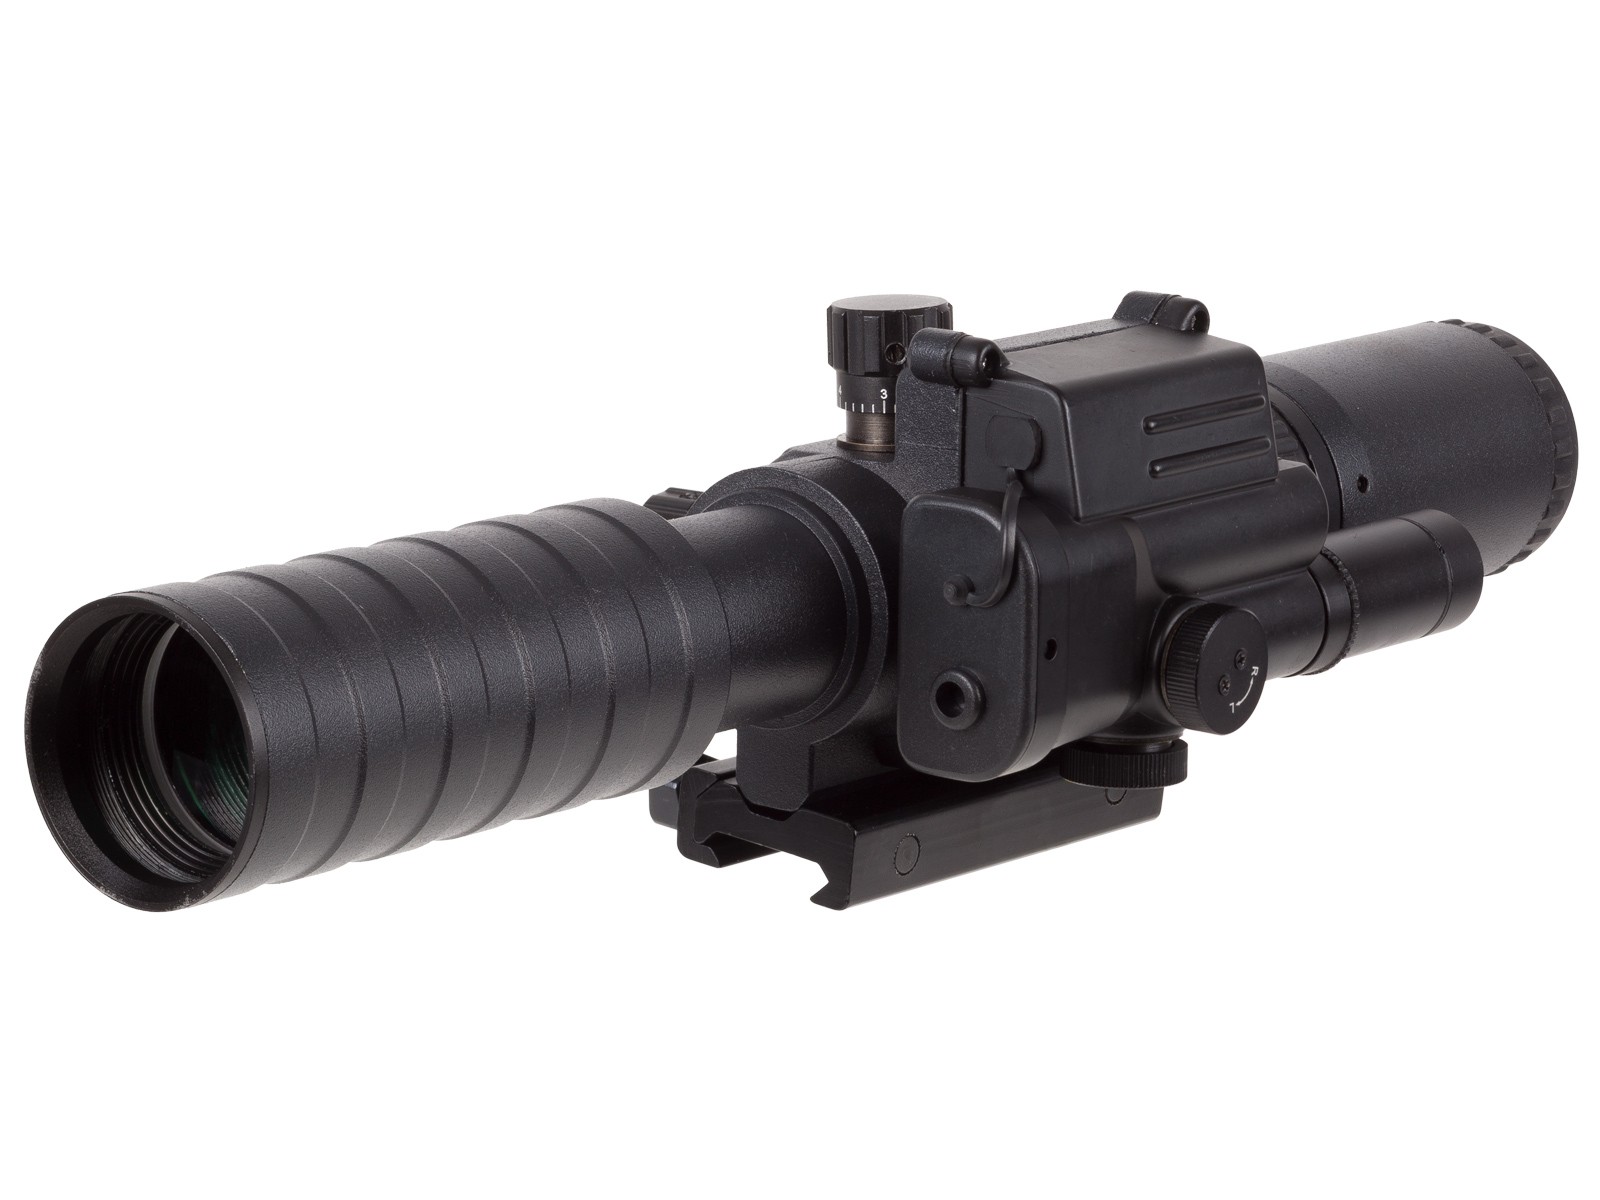 Spartan 3-9x32 Variable Rifle Scope With Integrated Tactical Laser And Rail Mount